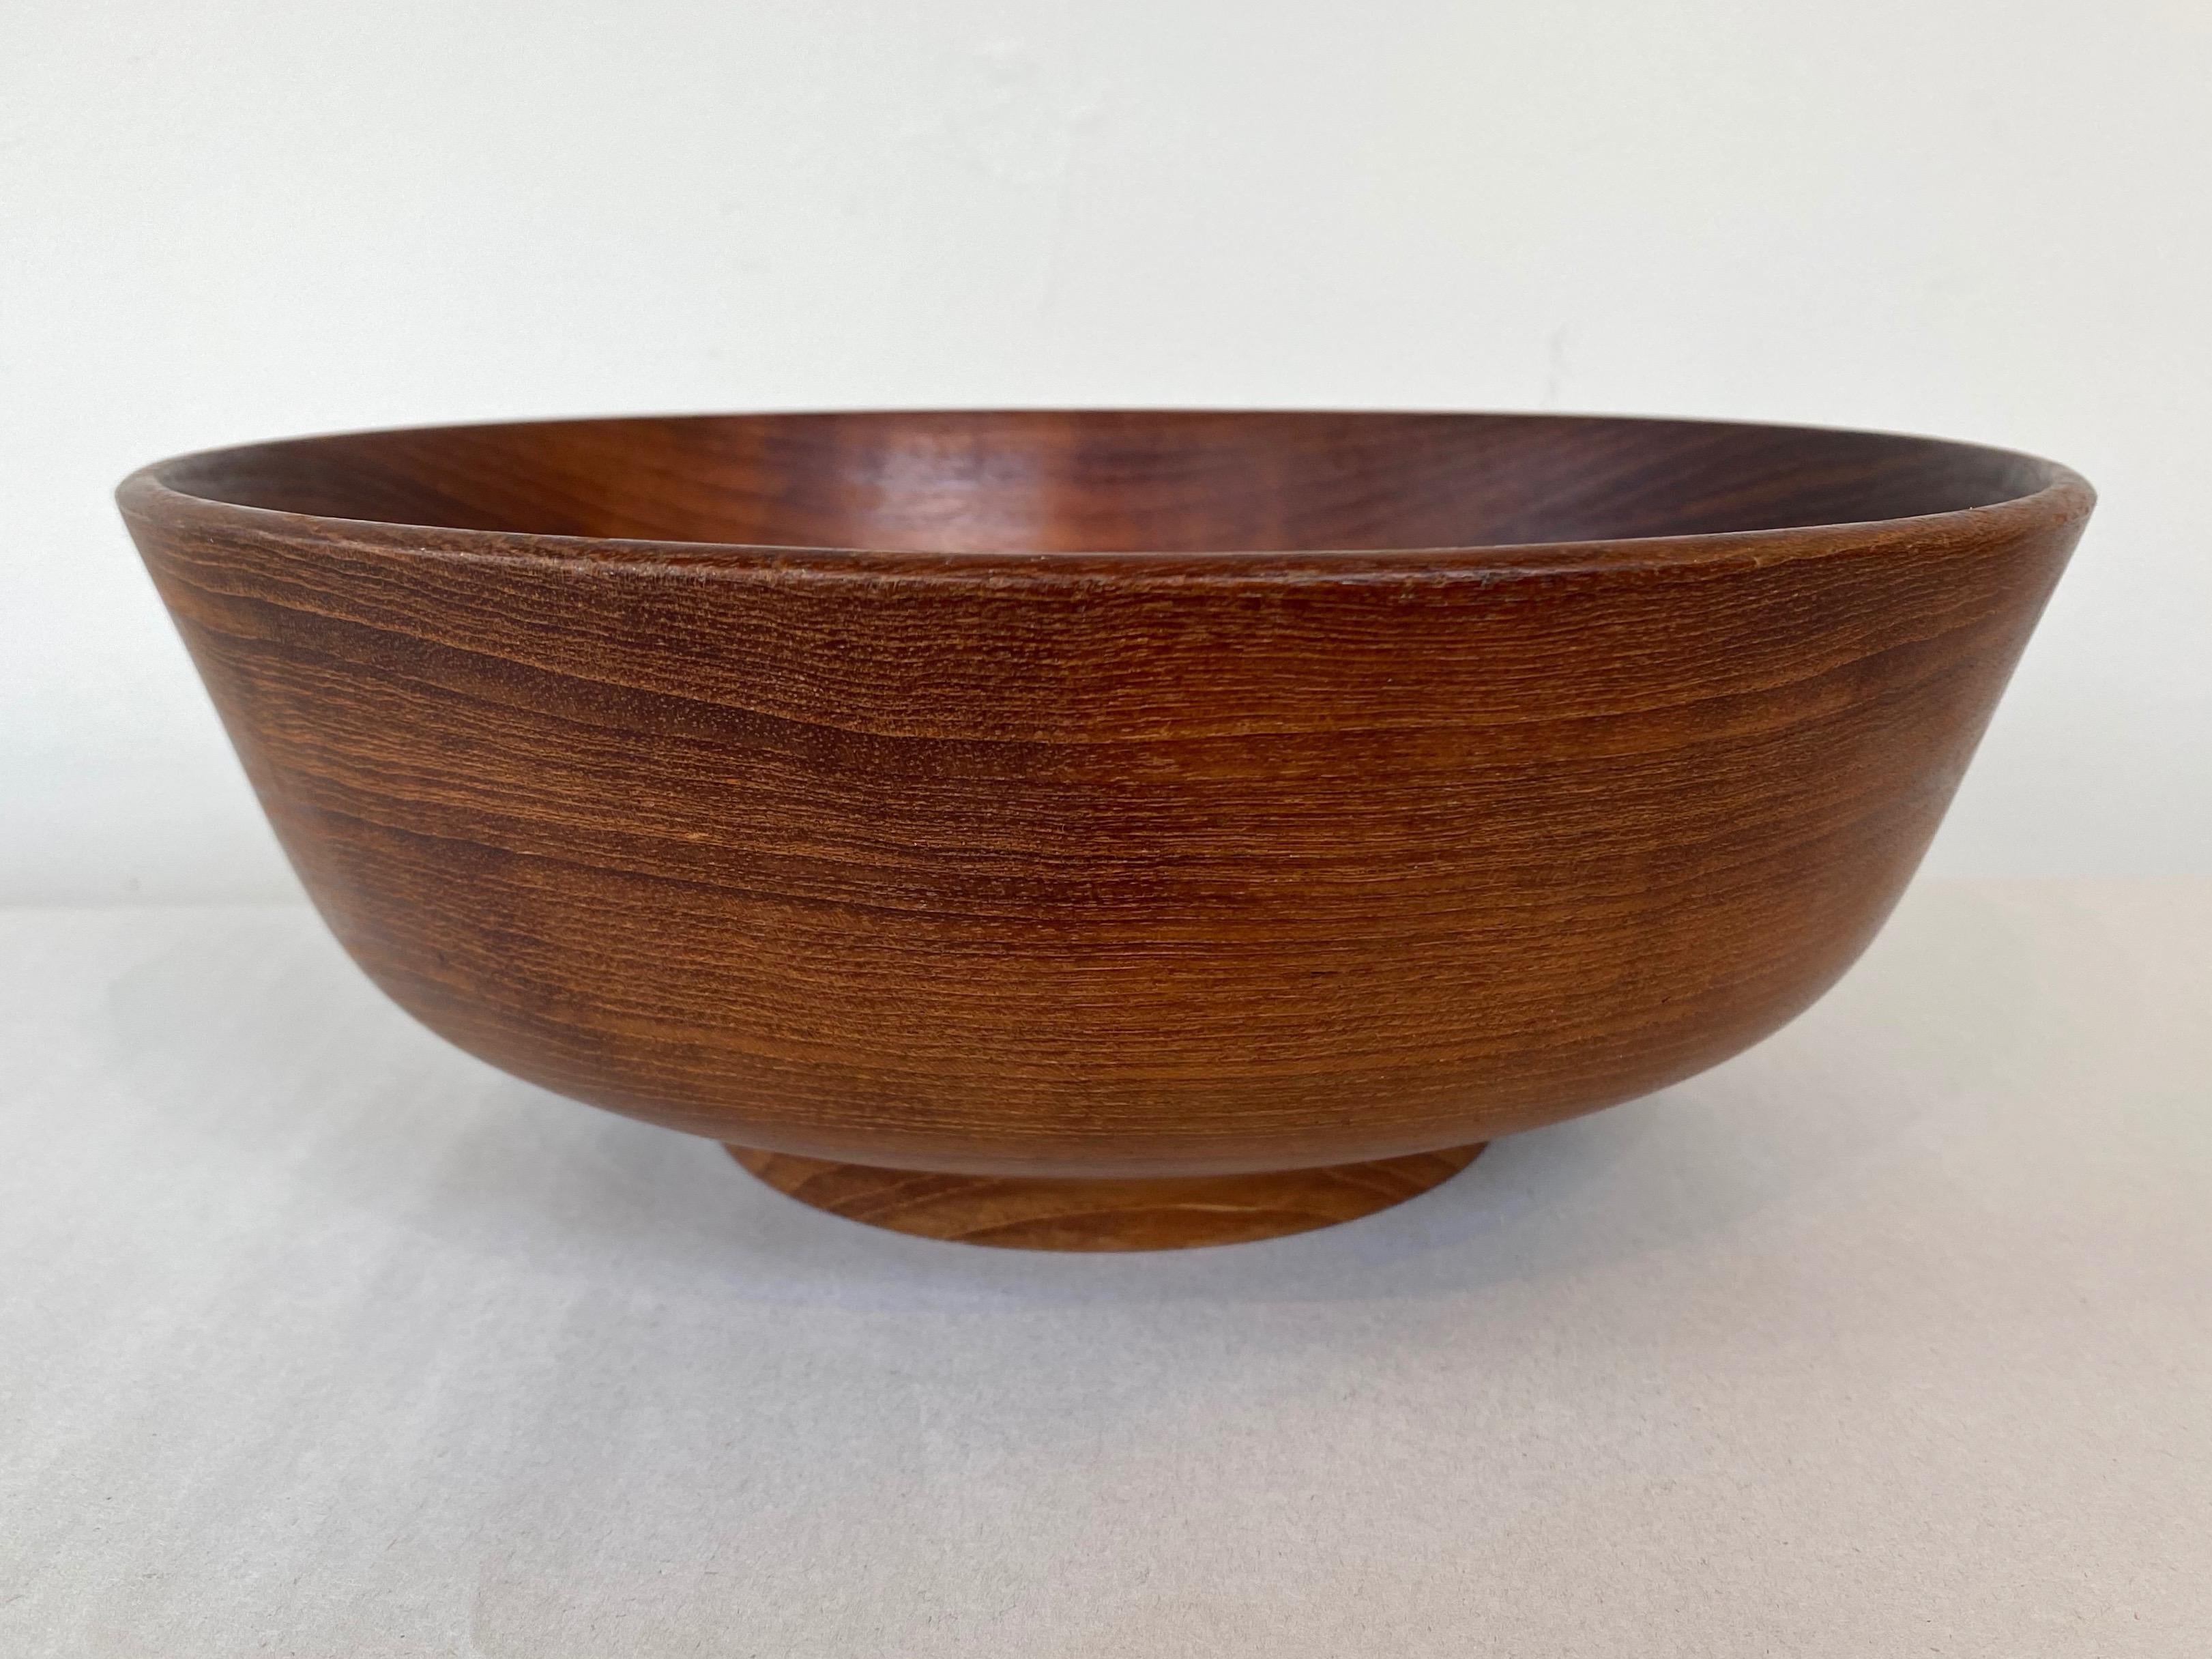 Bob Stocksdale Teak Turned Wood Bowl with Exceptional Grain Pattern, Early 1970s For Sale 3